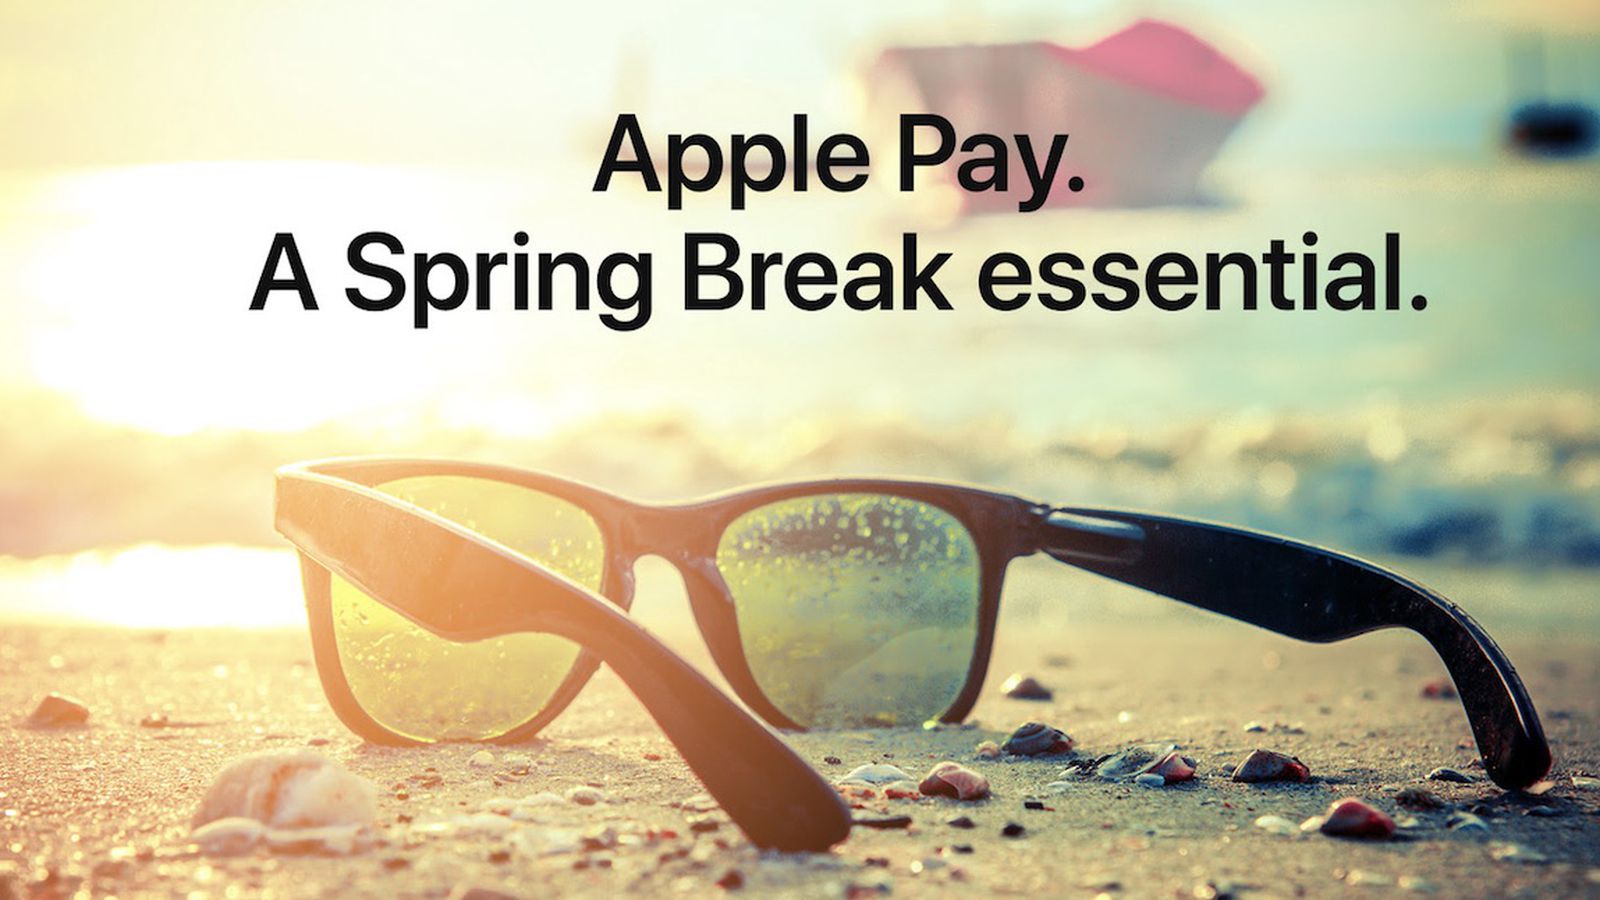 Apple Pay Promo Kicks Off Spring Break With Free Song Credits From Touchtunes Macrumors